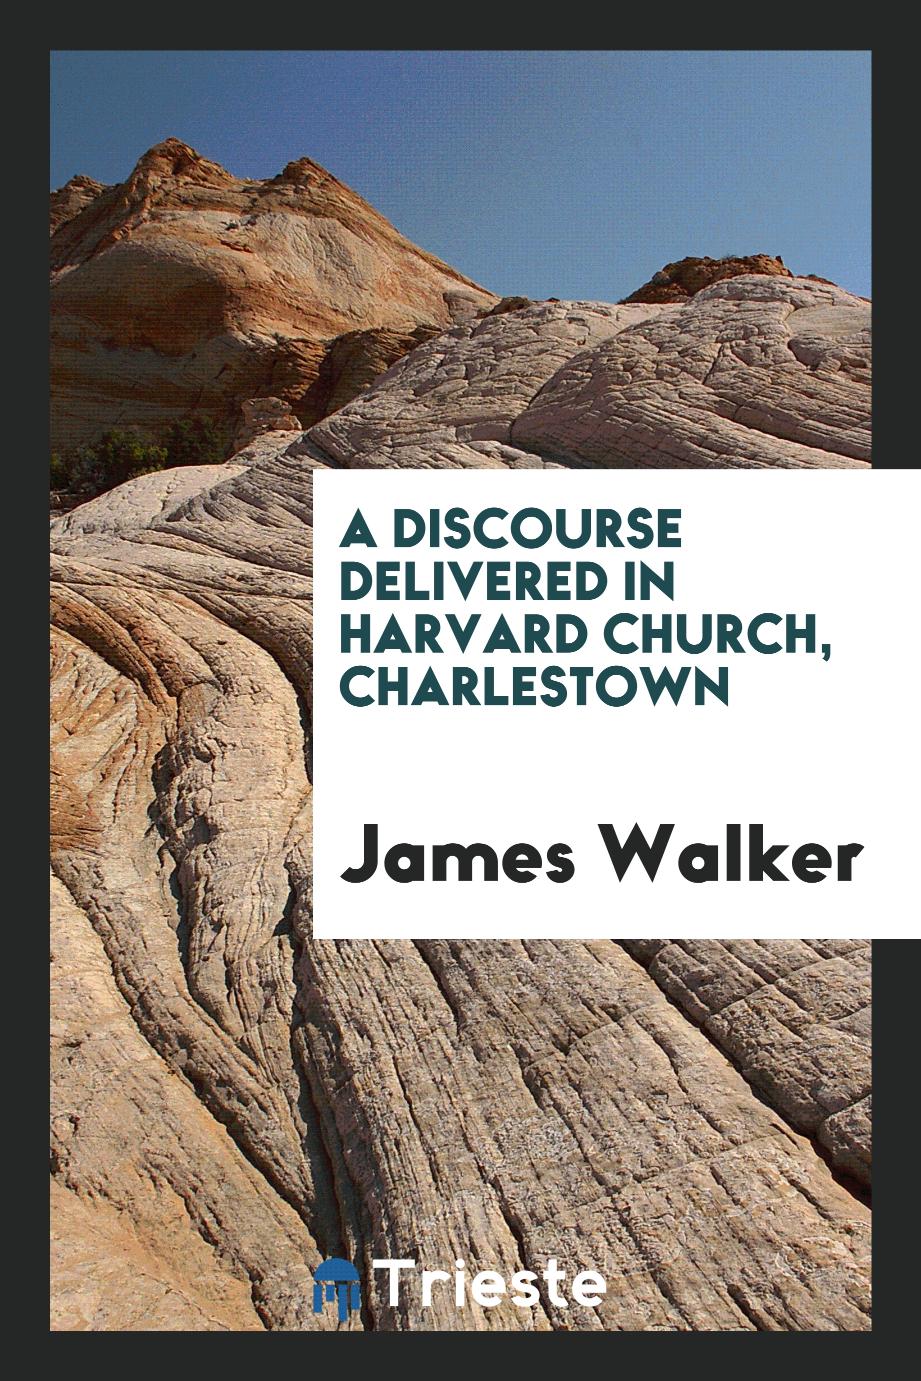 A discourse delivered in Harvard church, Charlestown